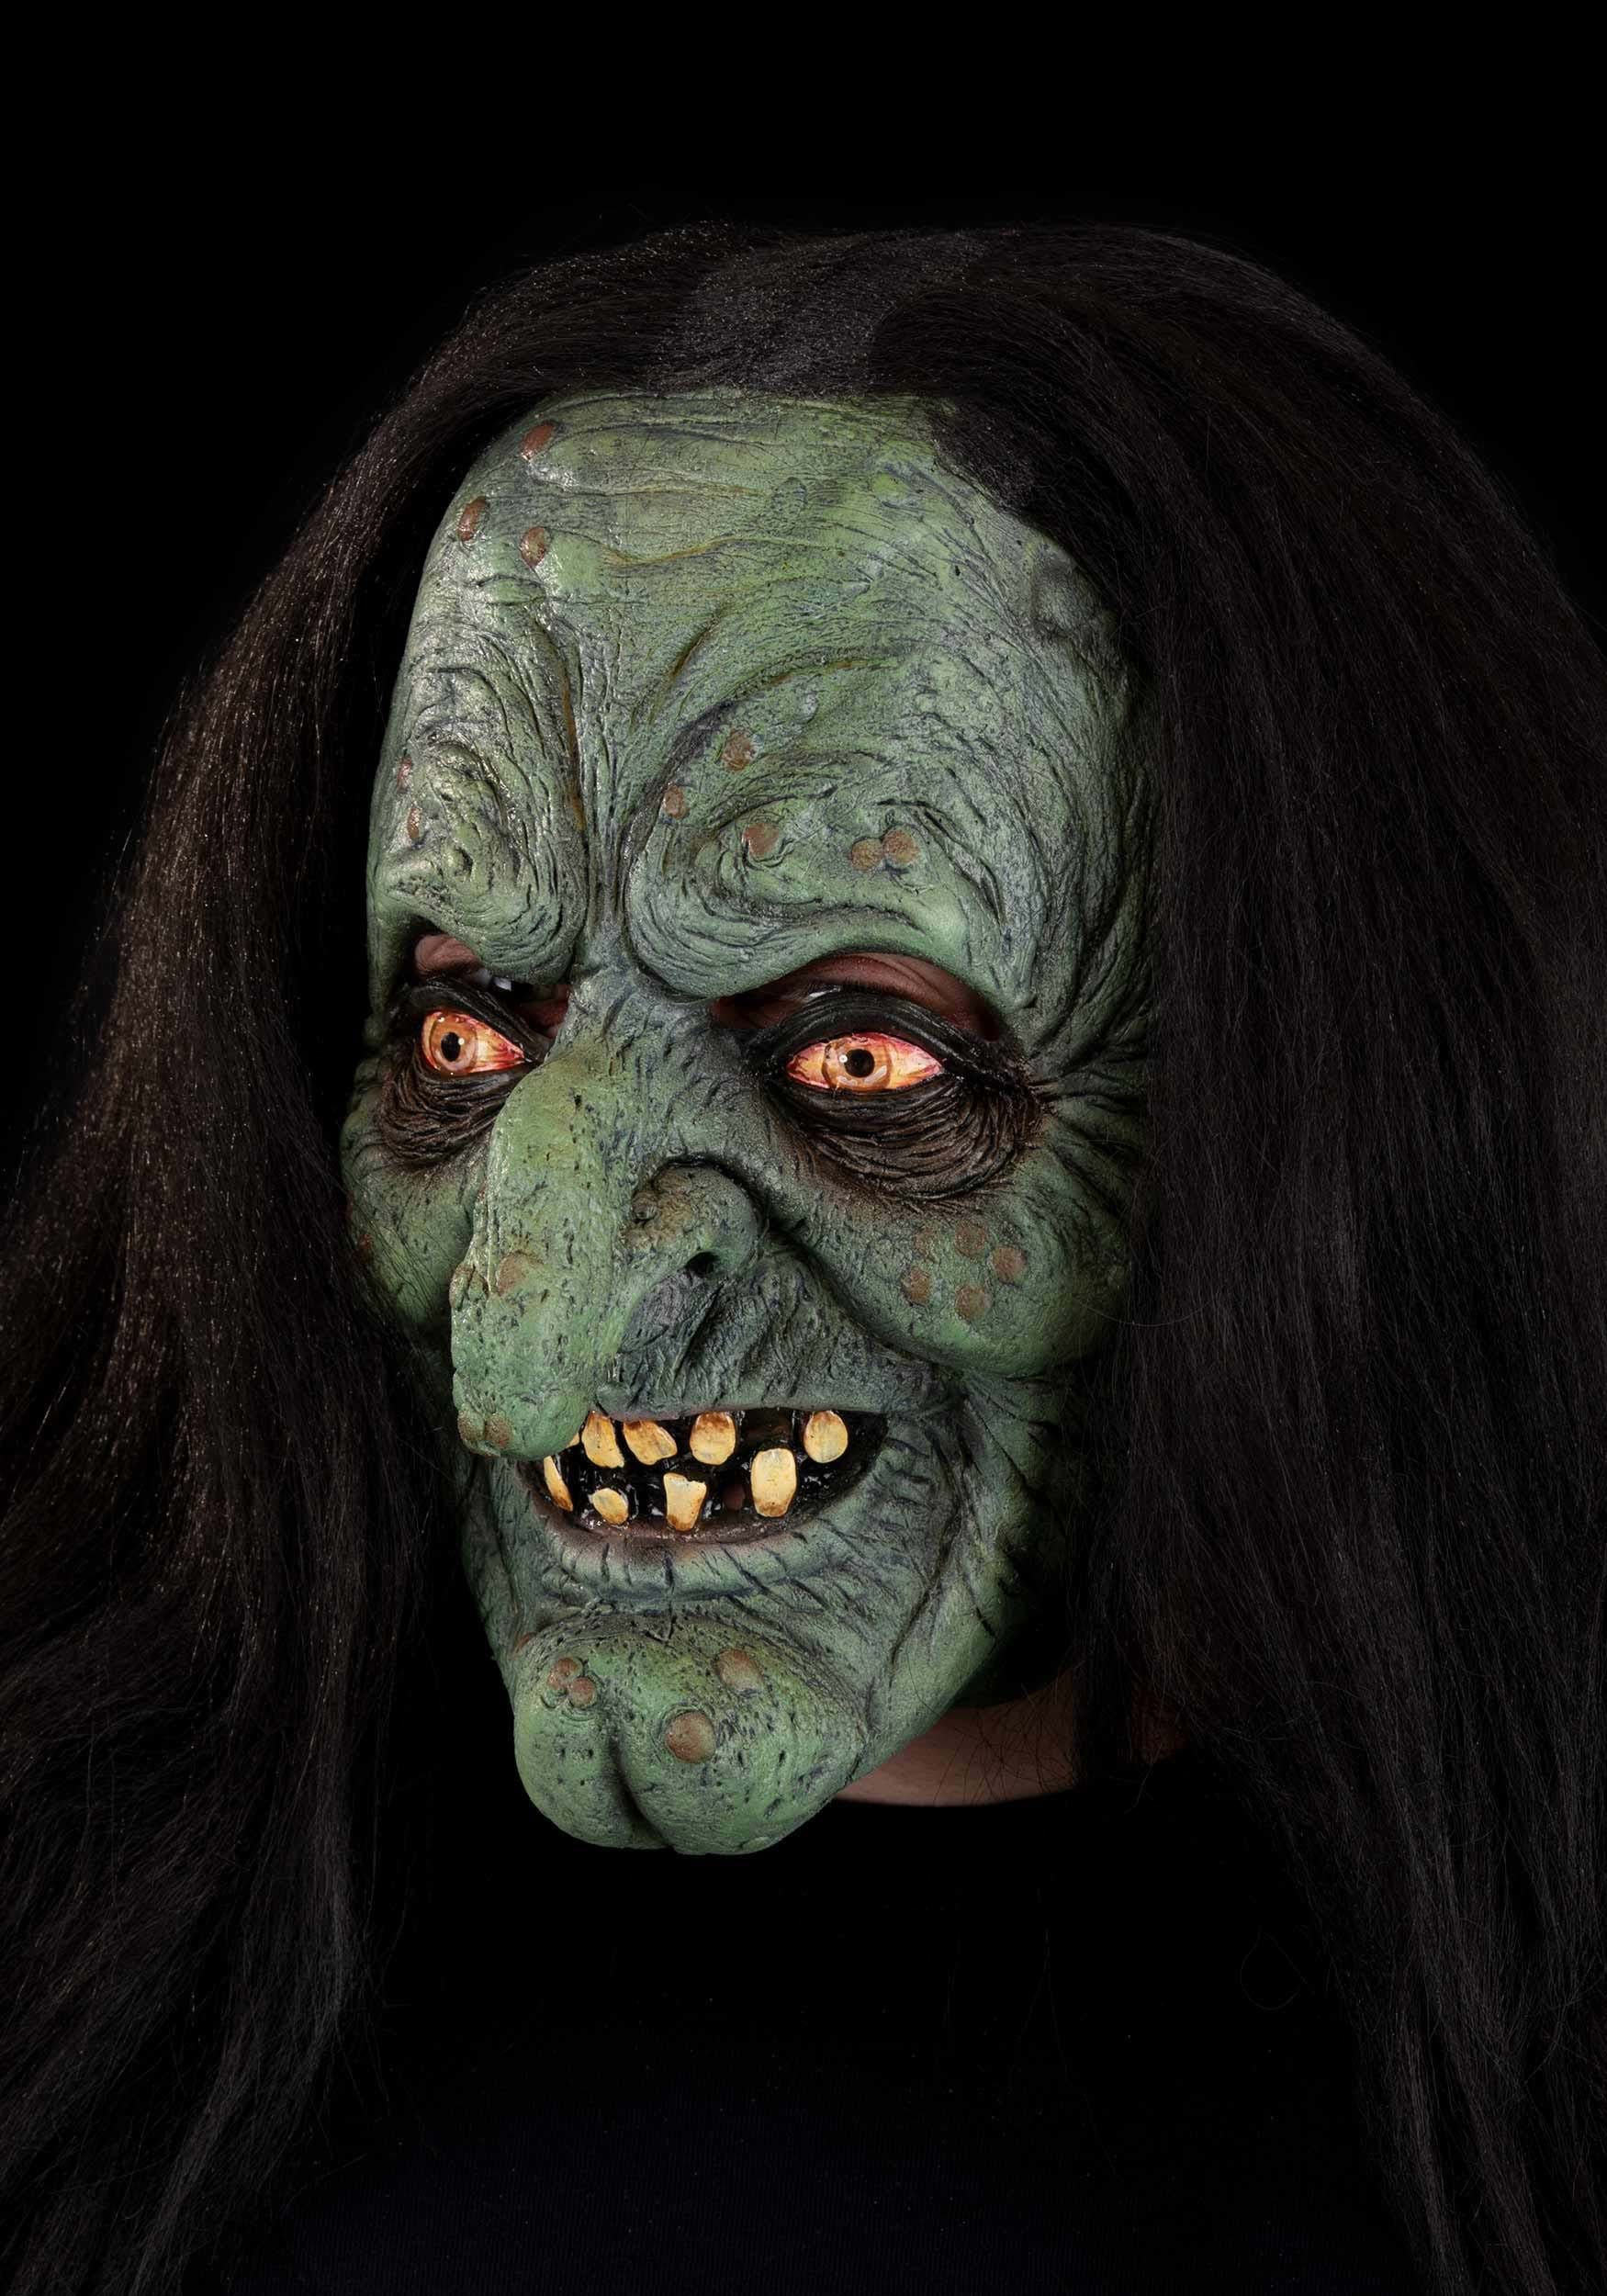 Adult Haxan Green Witch Mask